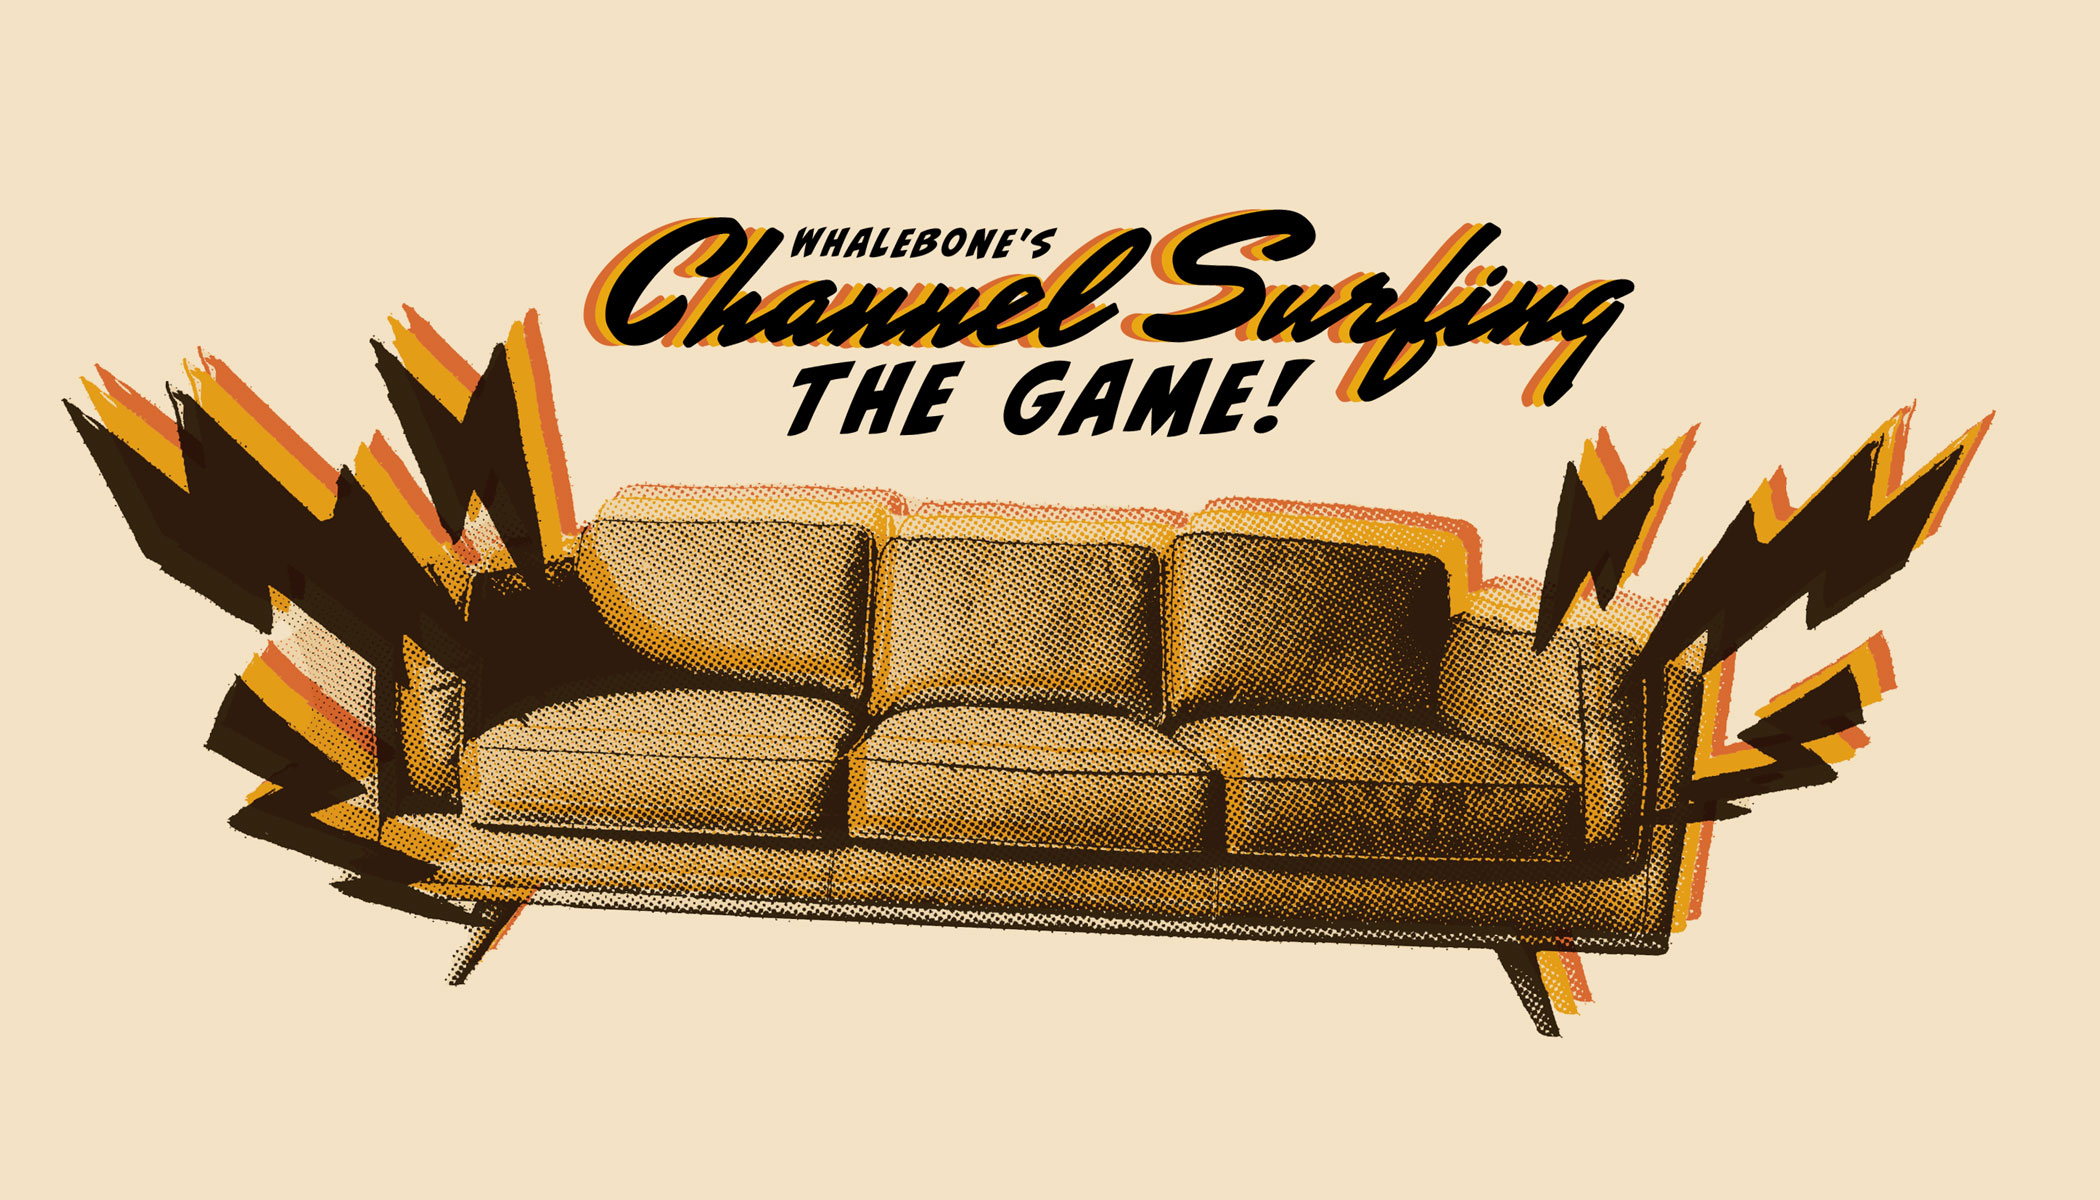 Whalebone’s Channel Surfing: The Game